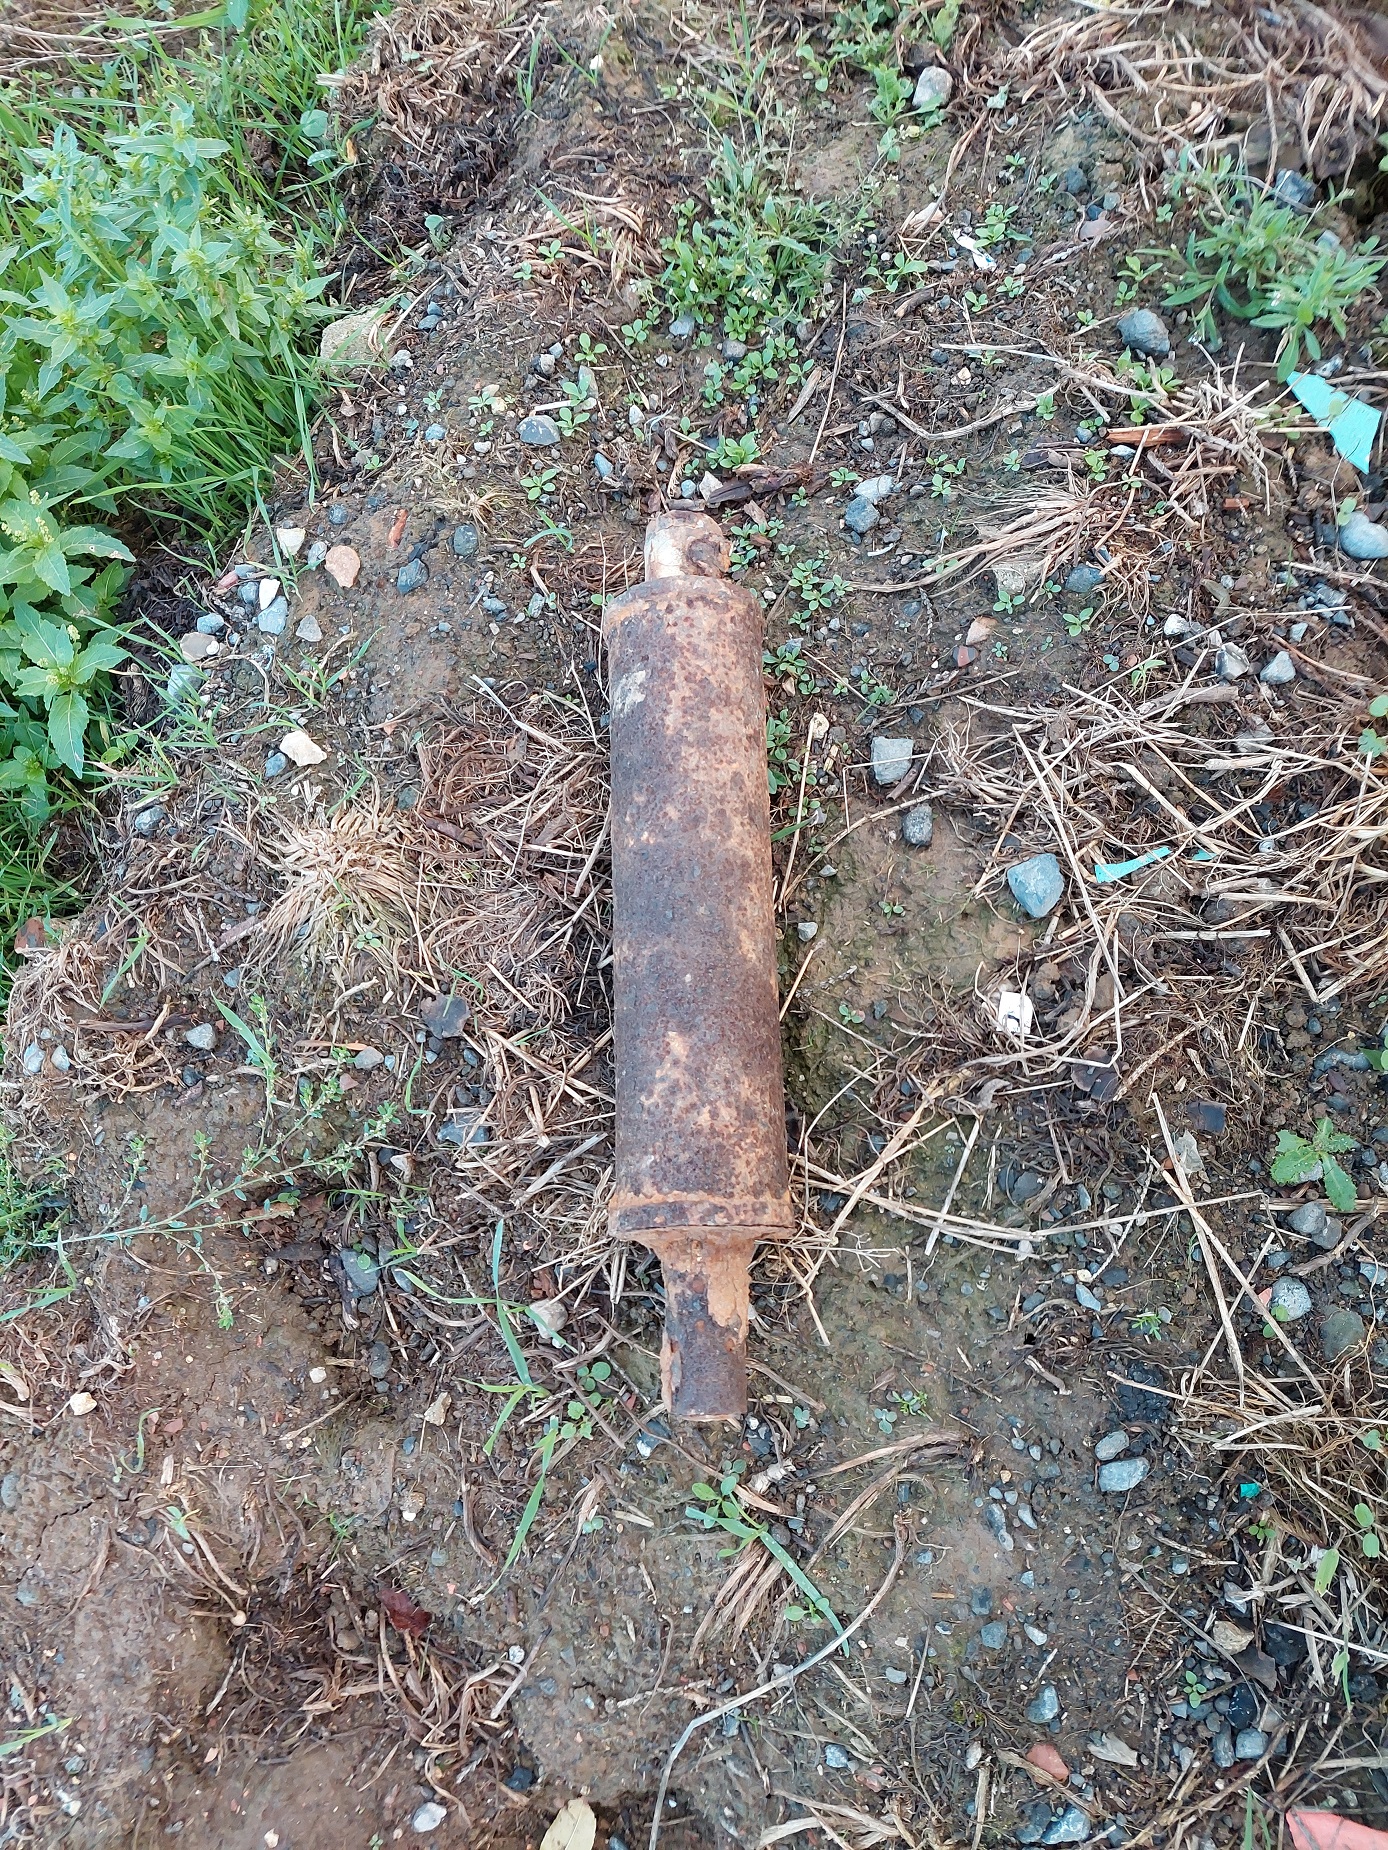 "A surprising harvest time find in the field next to the Butte".  A WW1 Stokes Mortar Taken by Bob Paterson October 2022